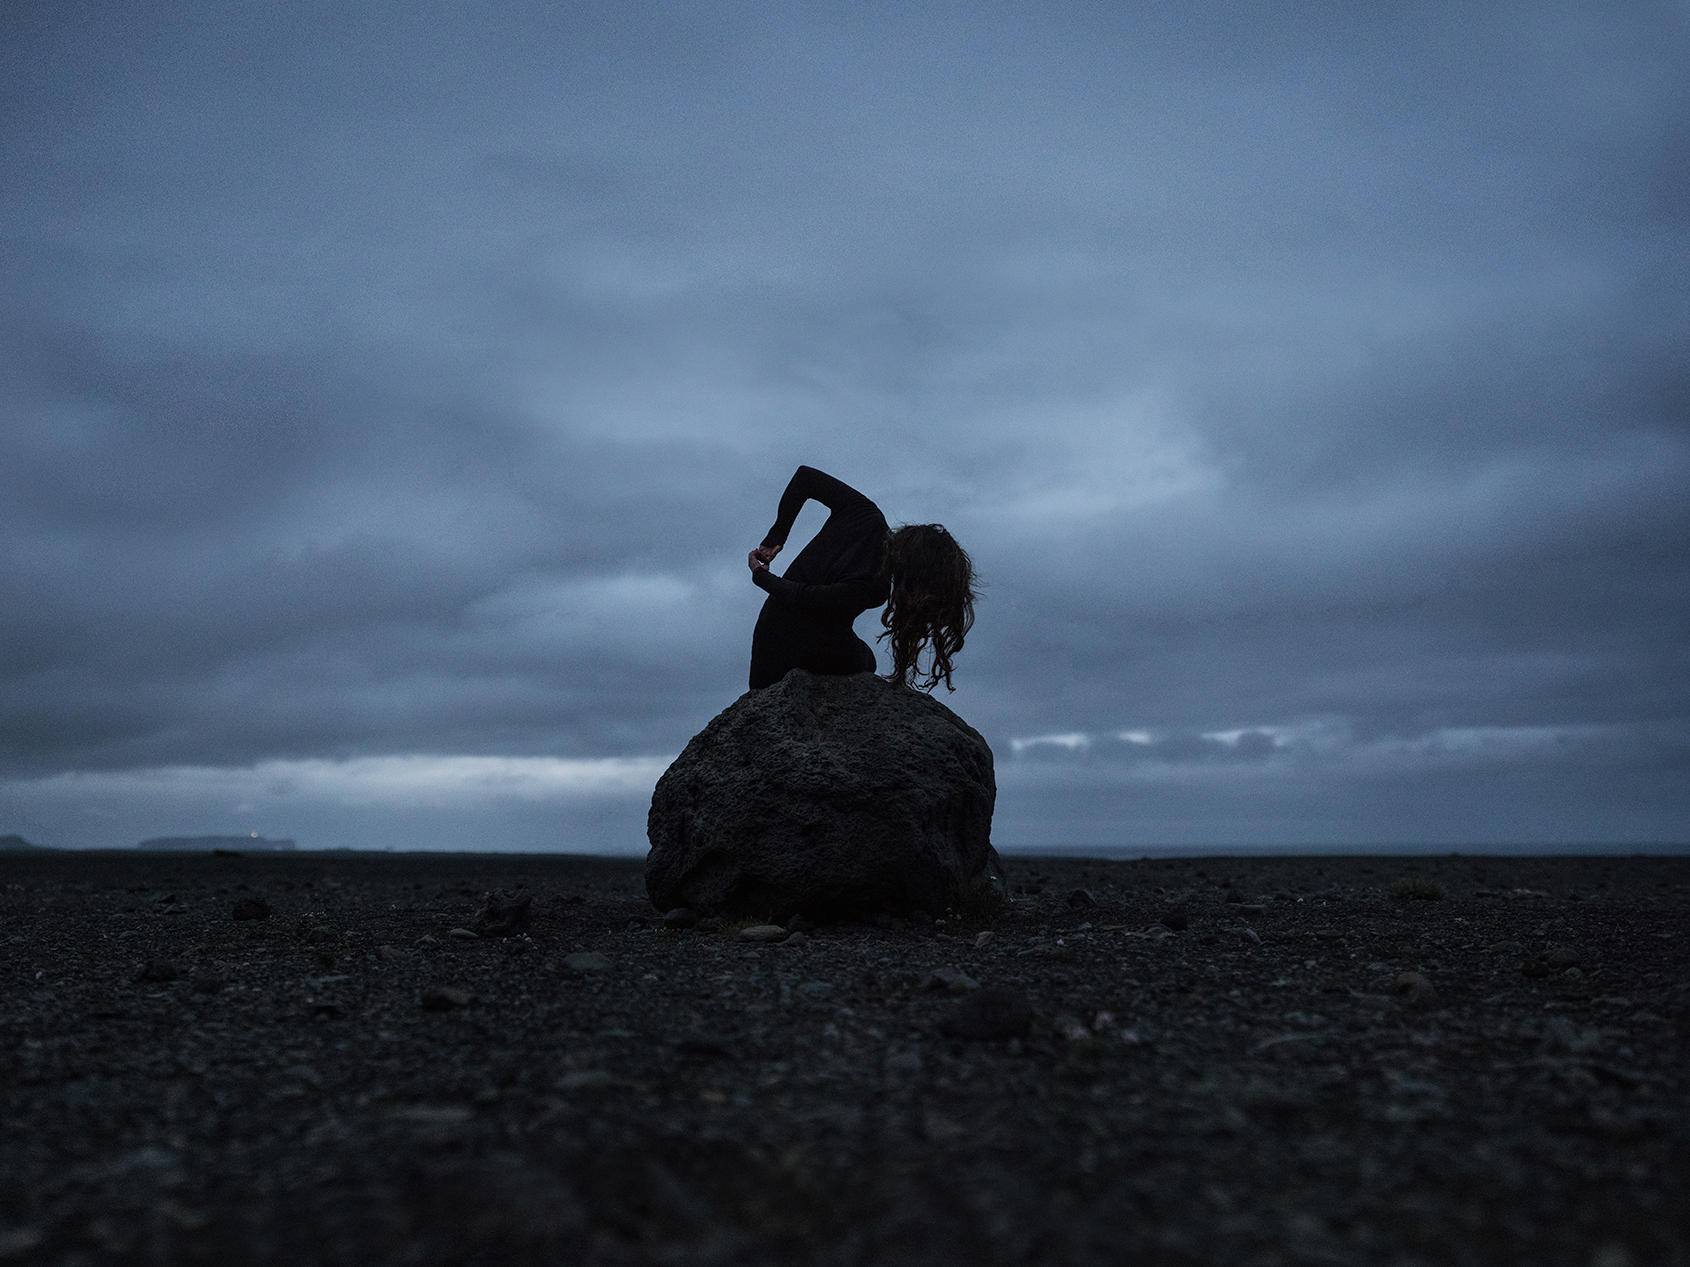 Self portrait photography showing a dark figure on a rock under a cloudy sky in Iceland.